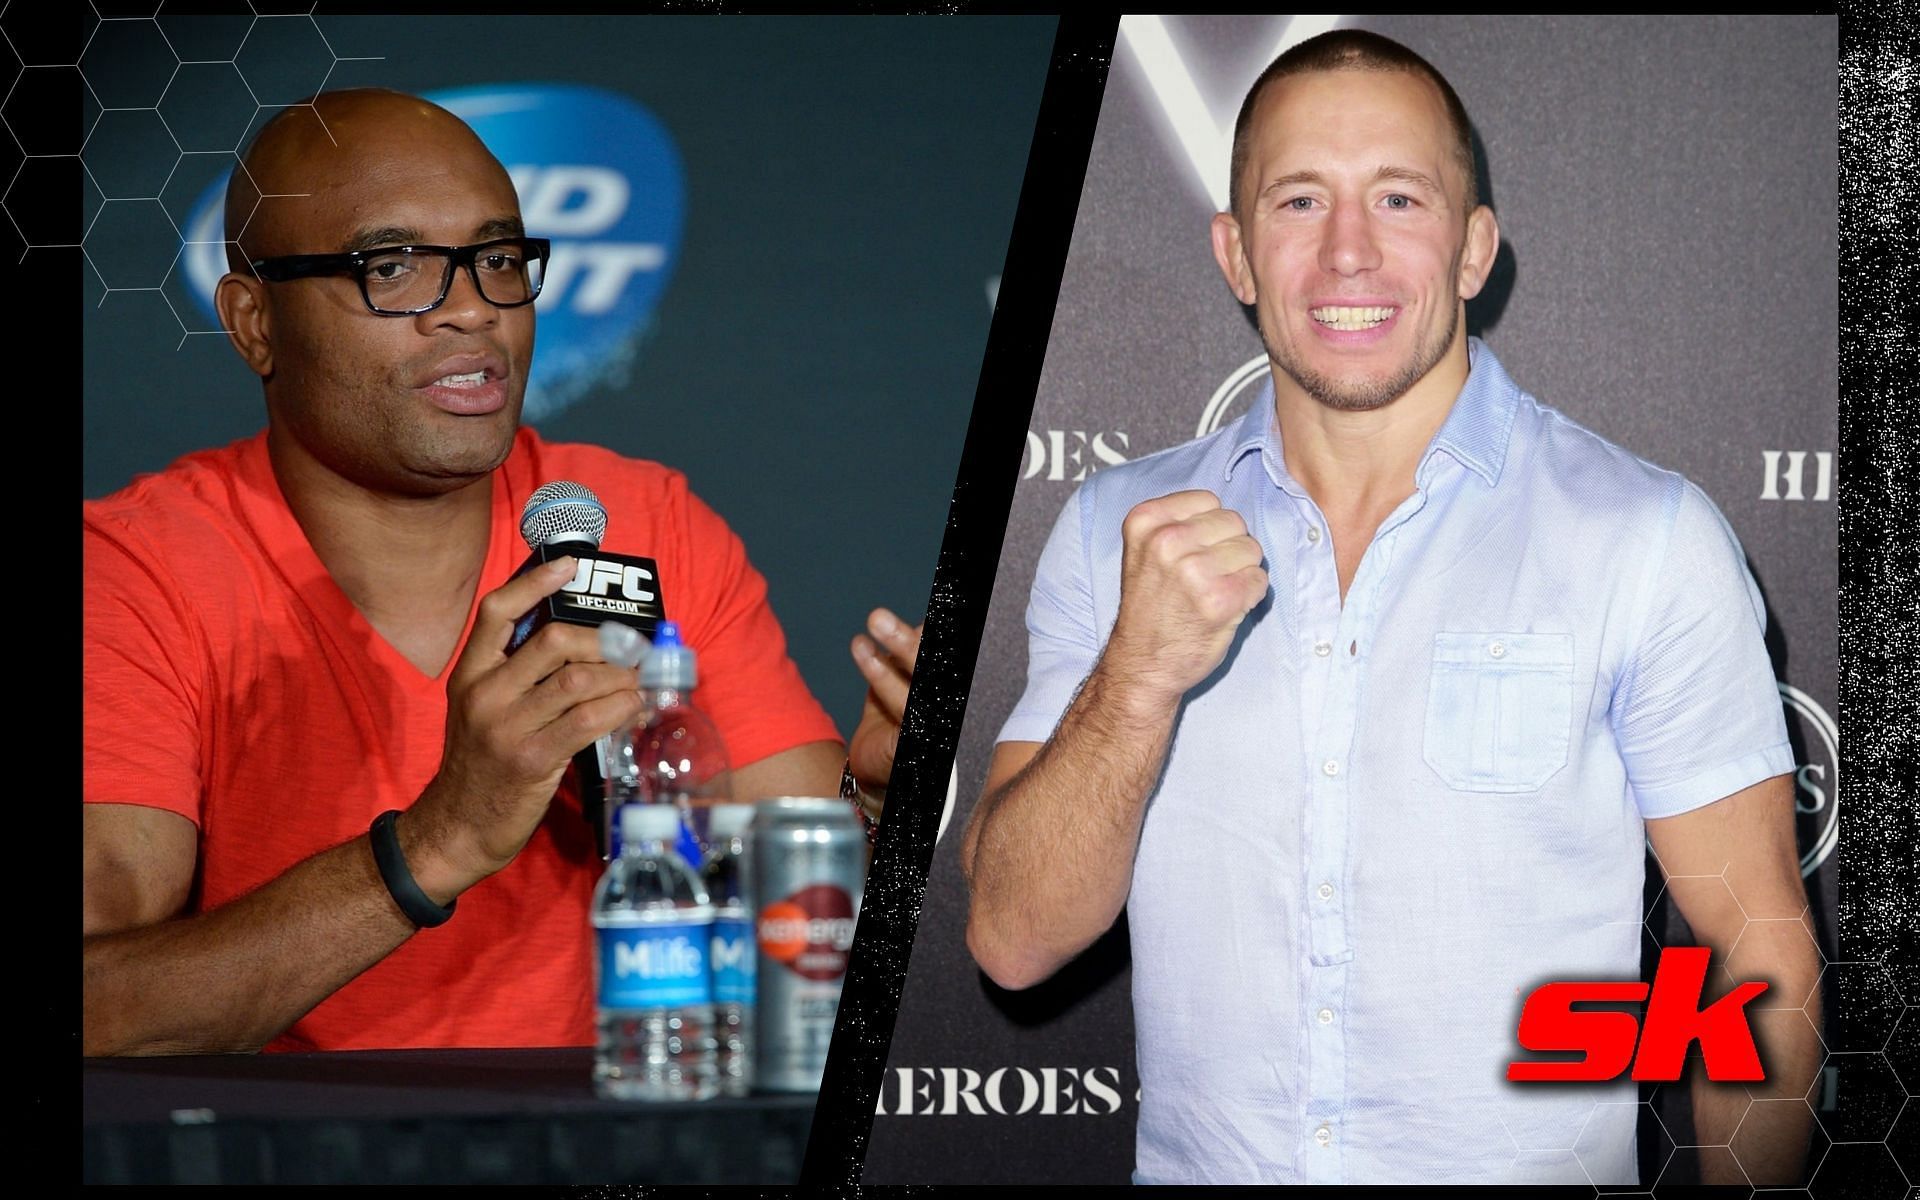 Anderson Silva expresses interest in boxing Georges St Pierre. [Image credits: Getty Images]